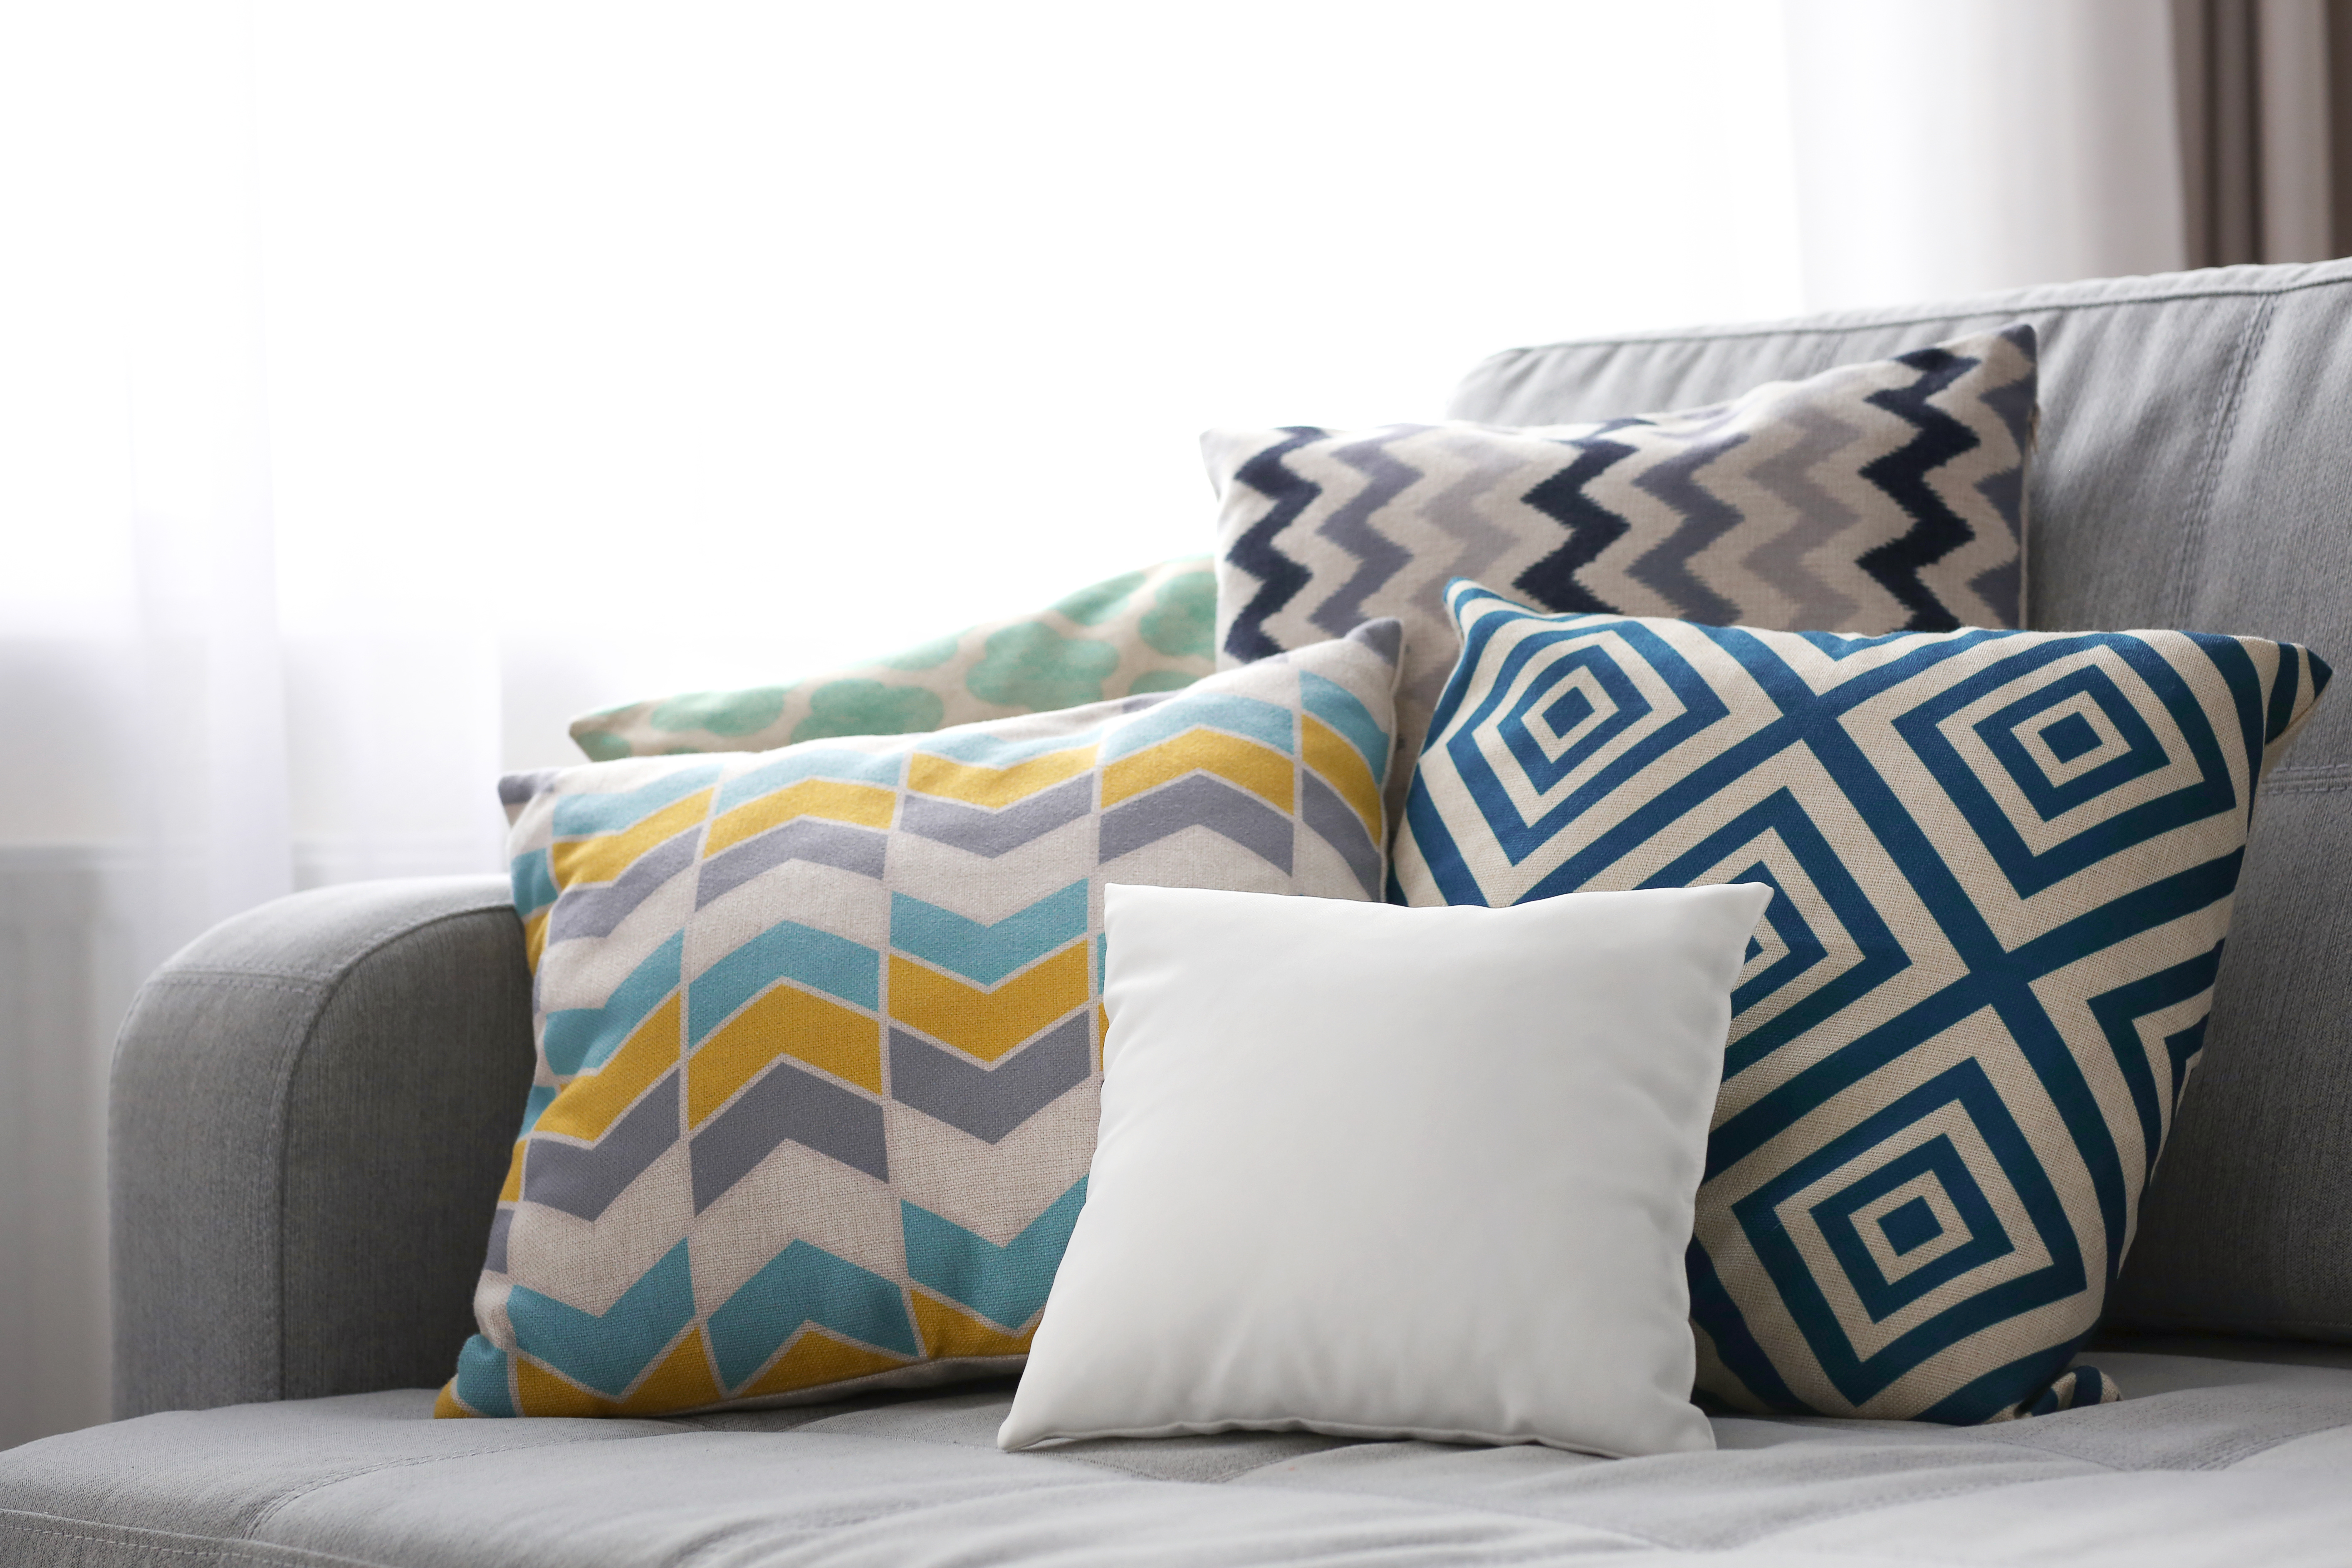 Decorate with soft cushions